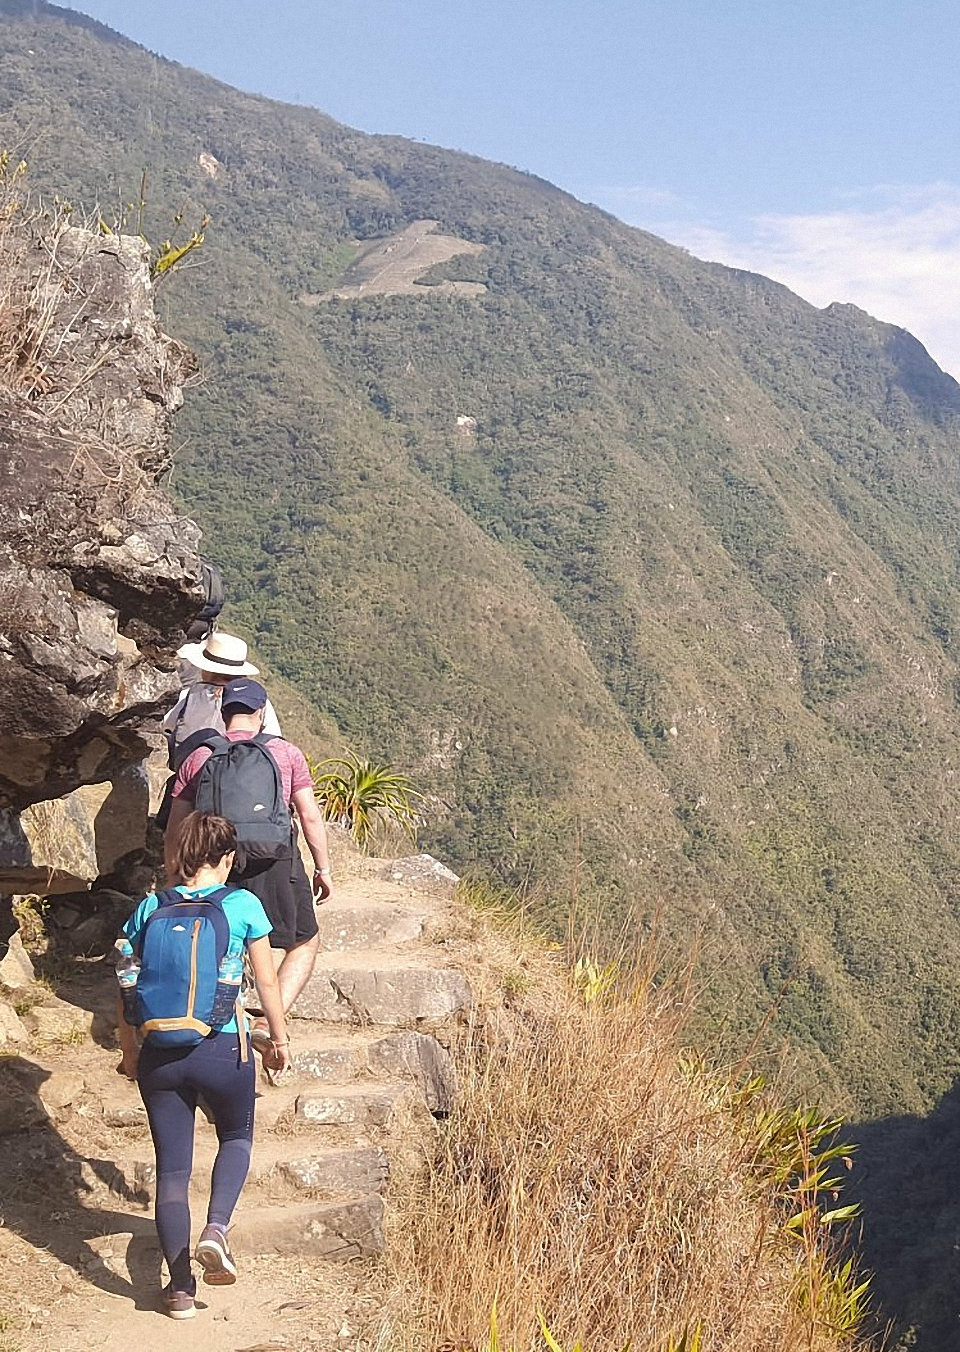 Fertur Peru Travel client on the final morning hiking the Inca Trail about to arrive Machu Picchu